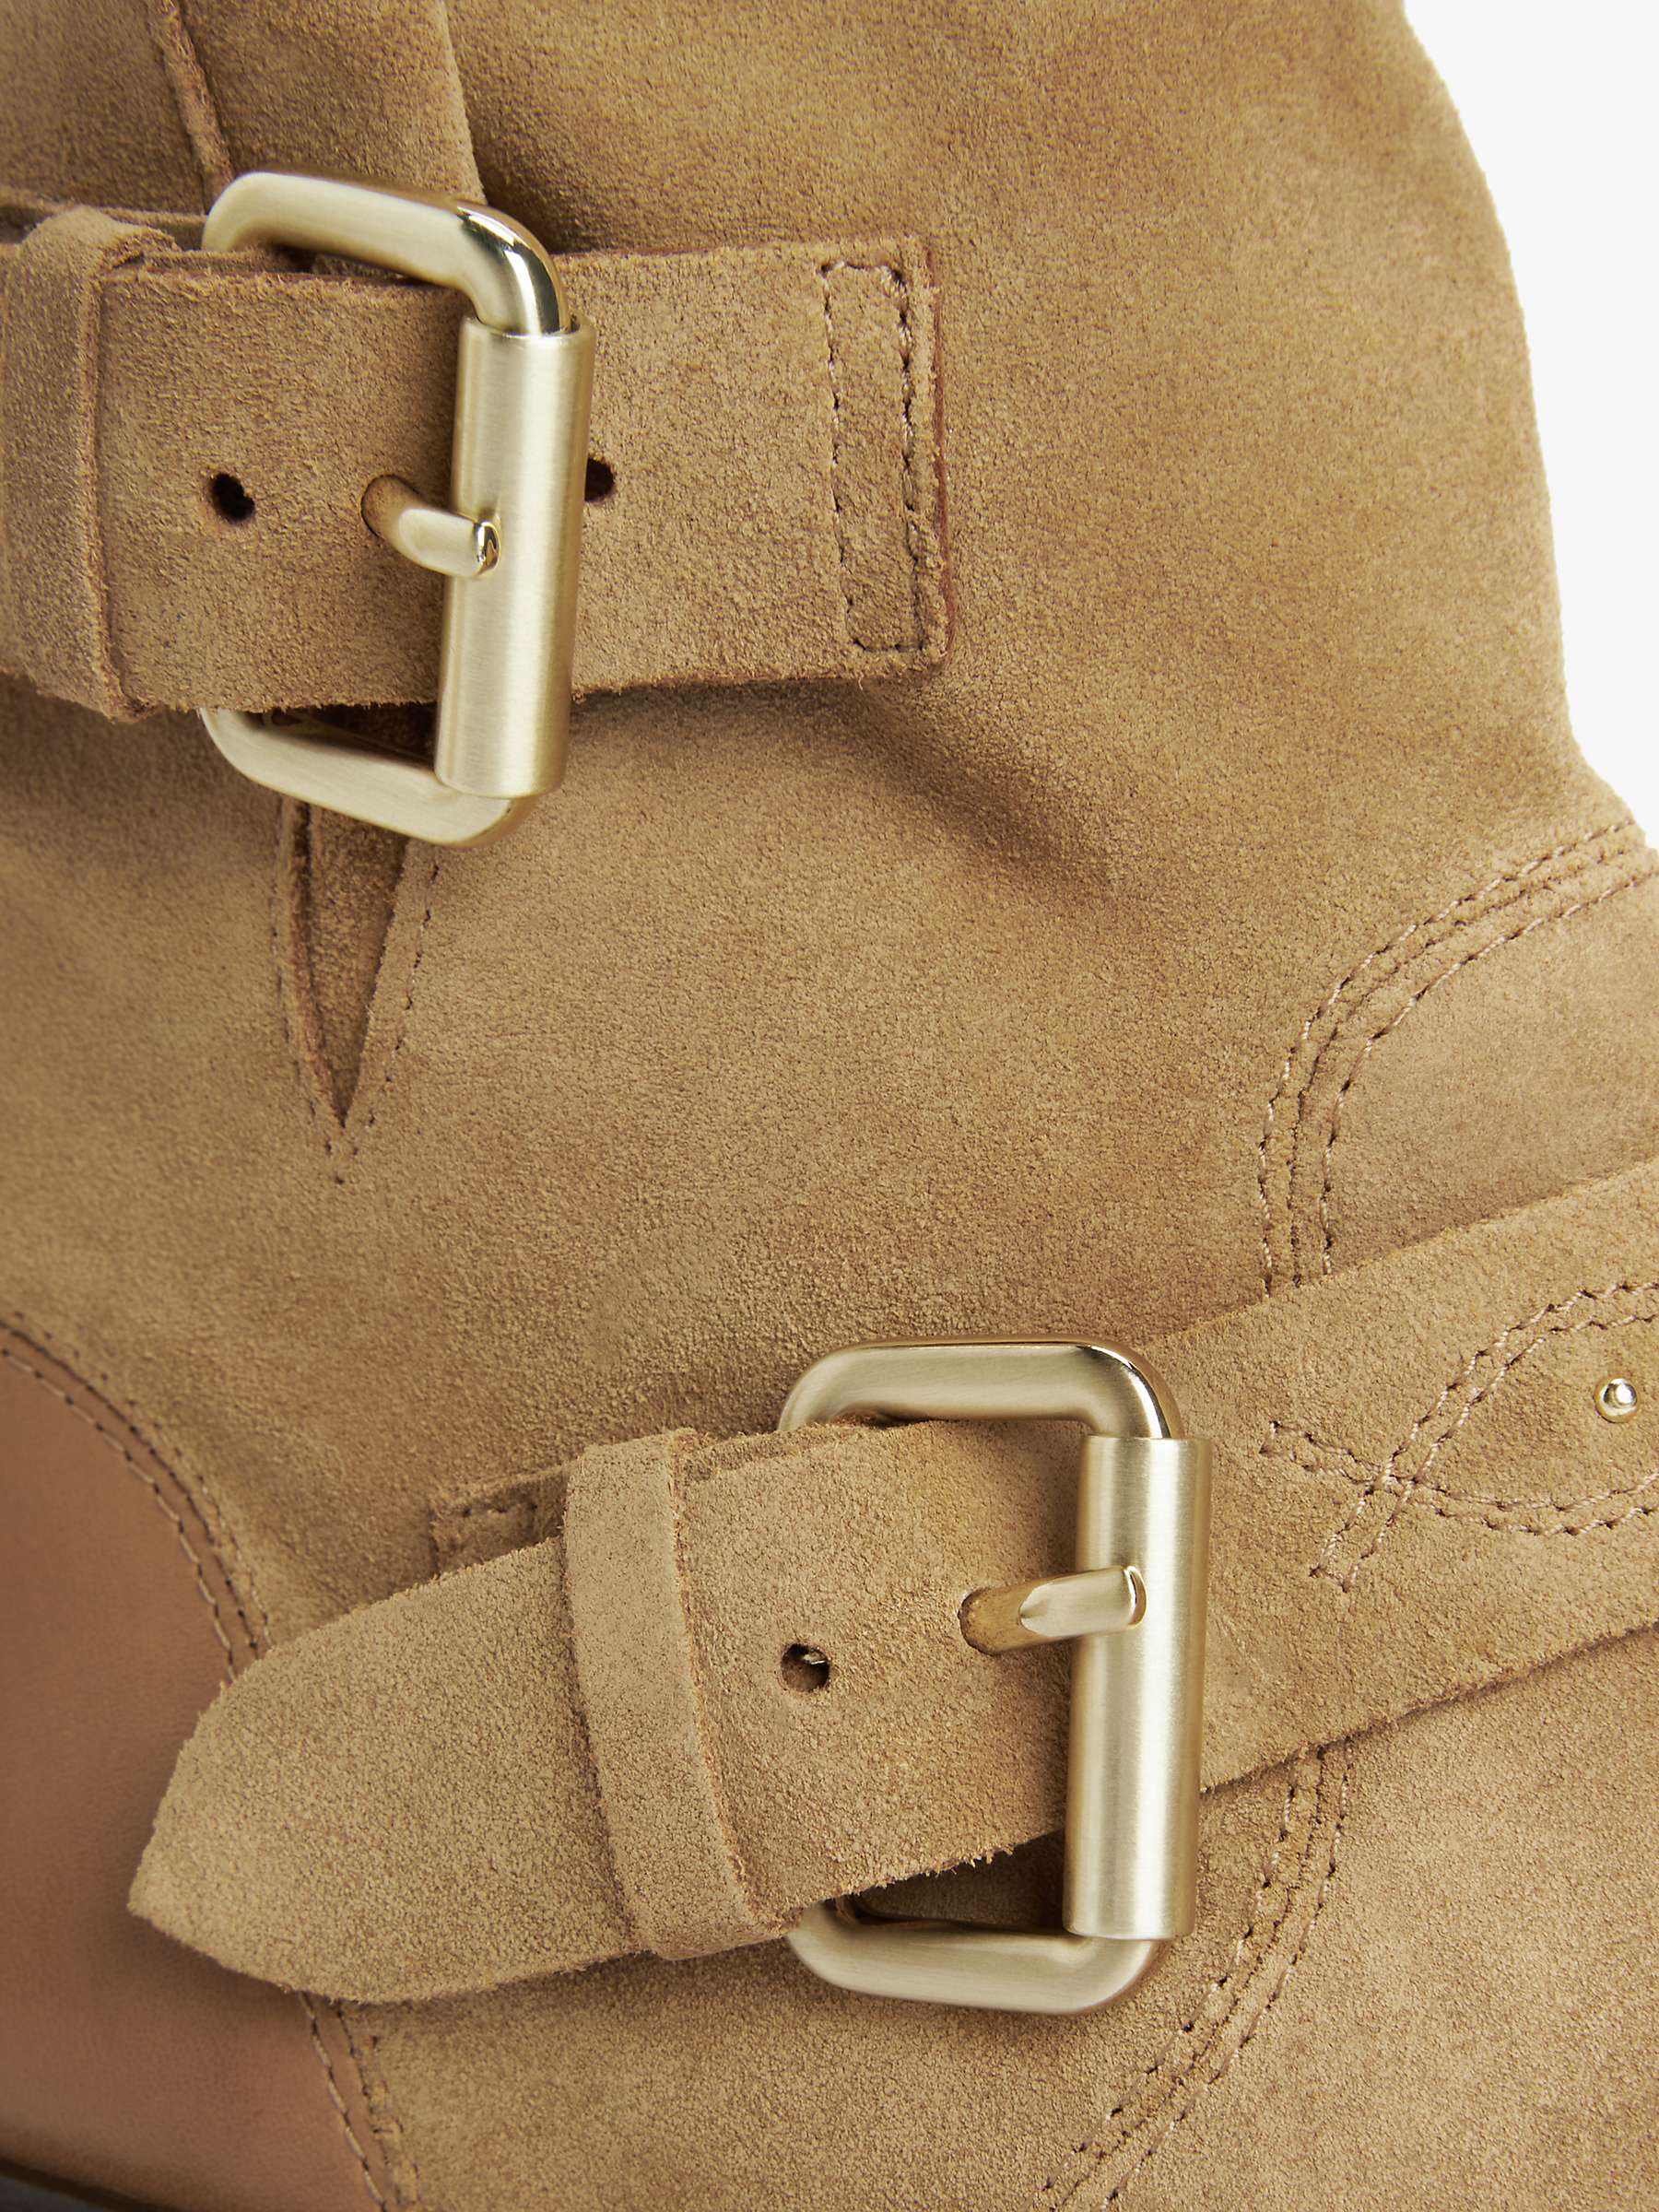 Buy AND/OR River Suede Double Buckle Biker Boots, Light Brown Online at johnlewis.com